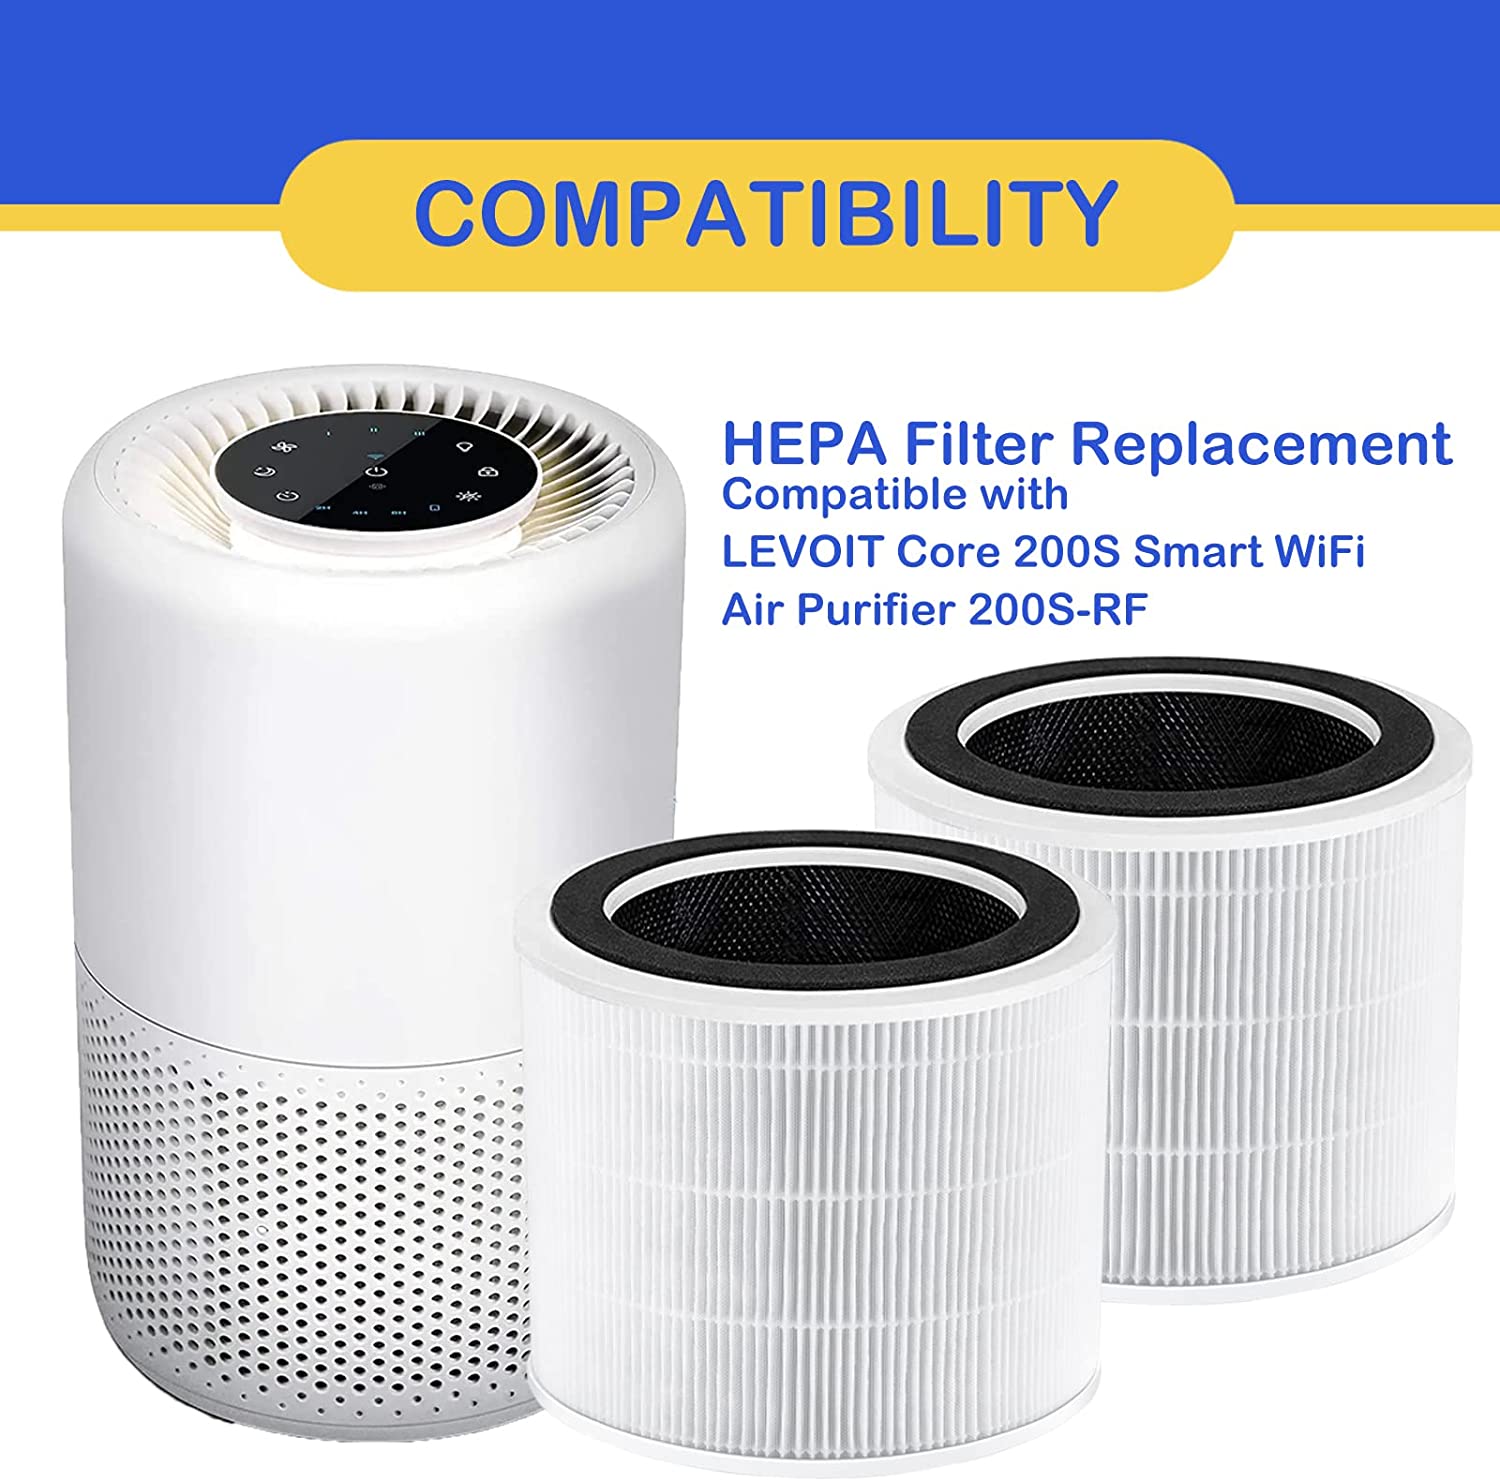 Pet Core 200S HEPA Filters Replacement Compatible with LEVOIT Core 200S Smart WiFi Air Cleaner Purifier, 3 in 1 Filtration Systems HEPASilent and Activated Carbon Filter, 3 Pack Yellow